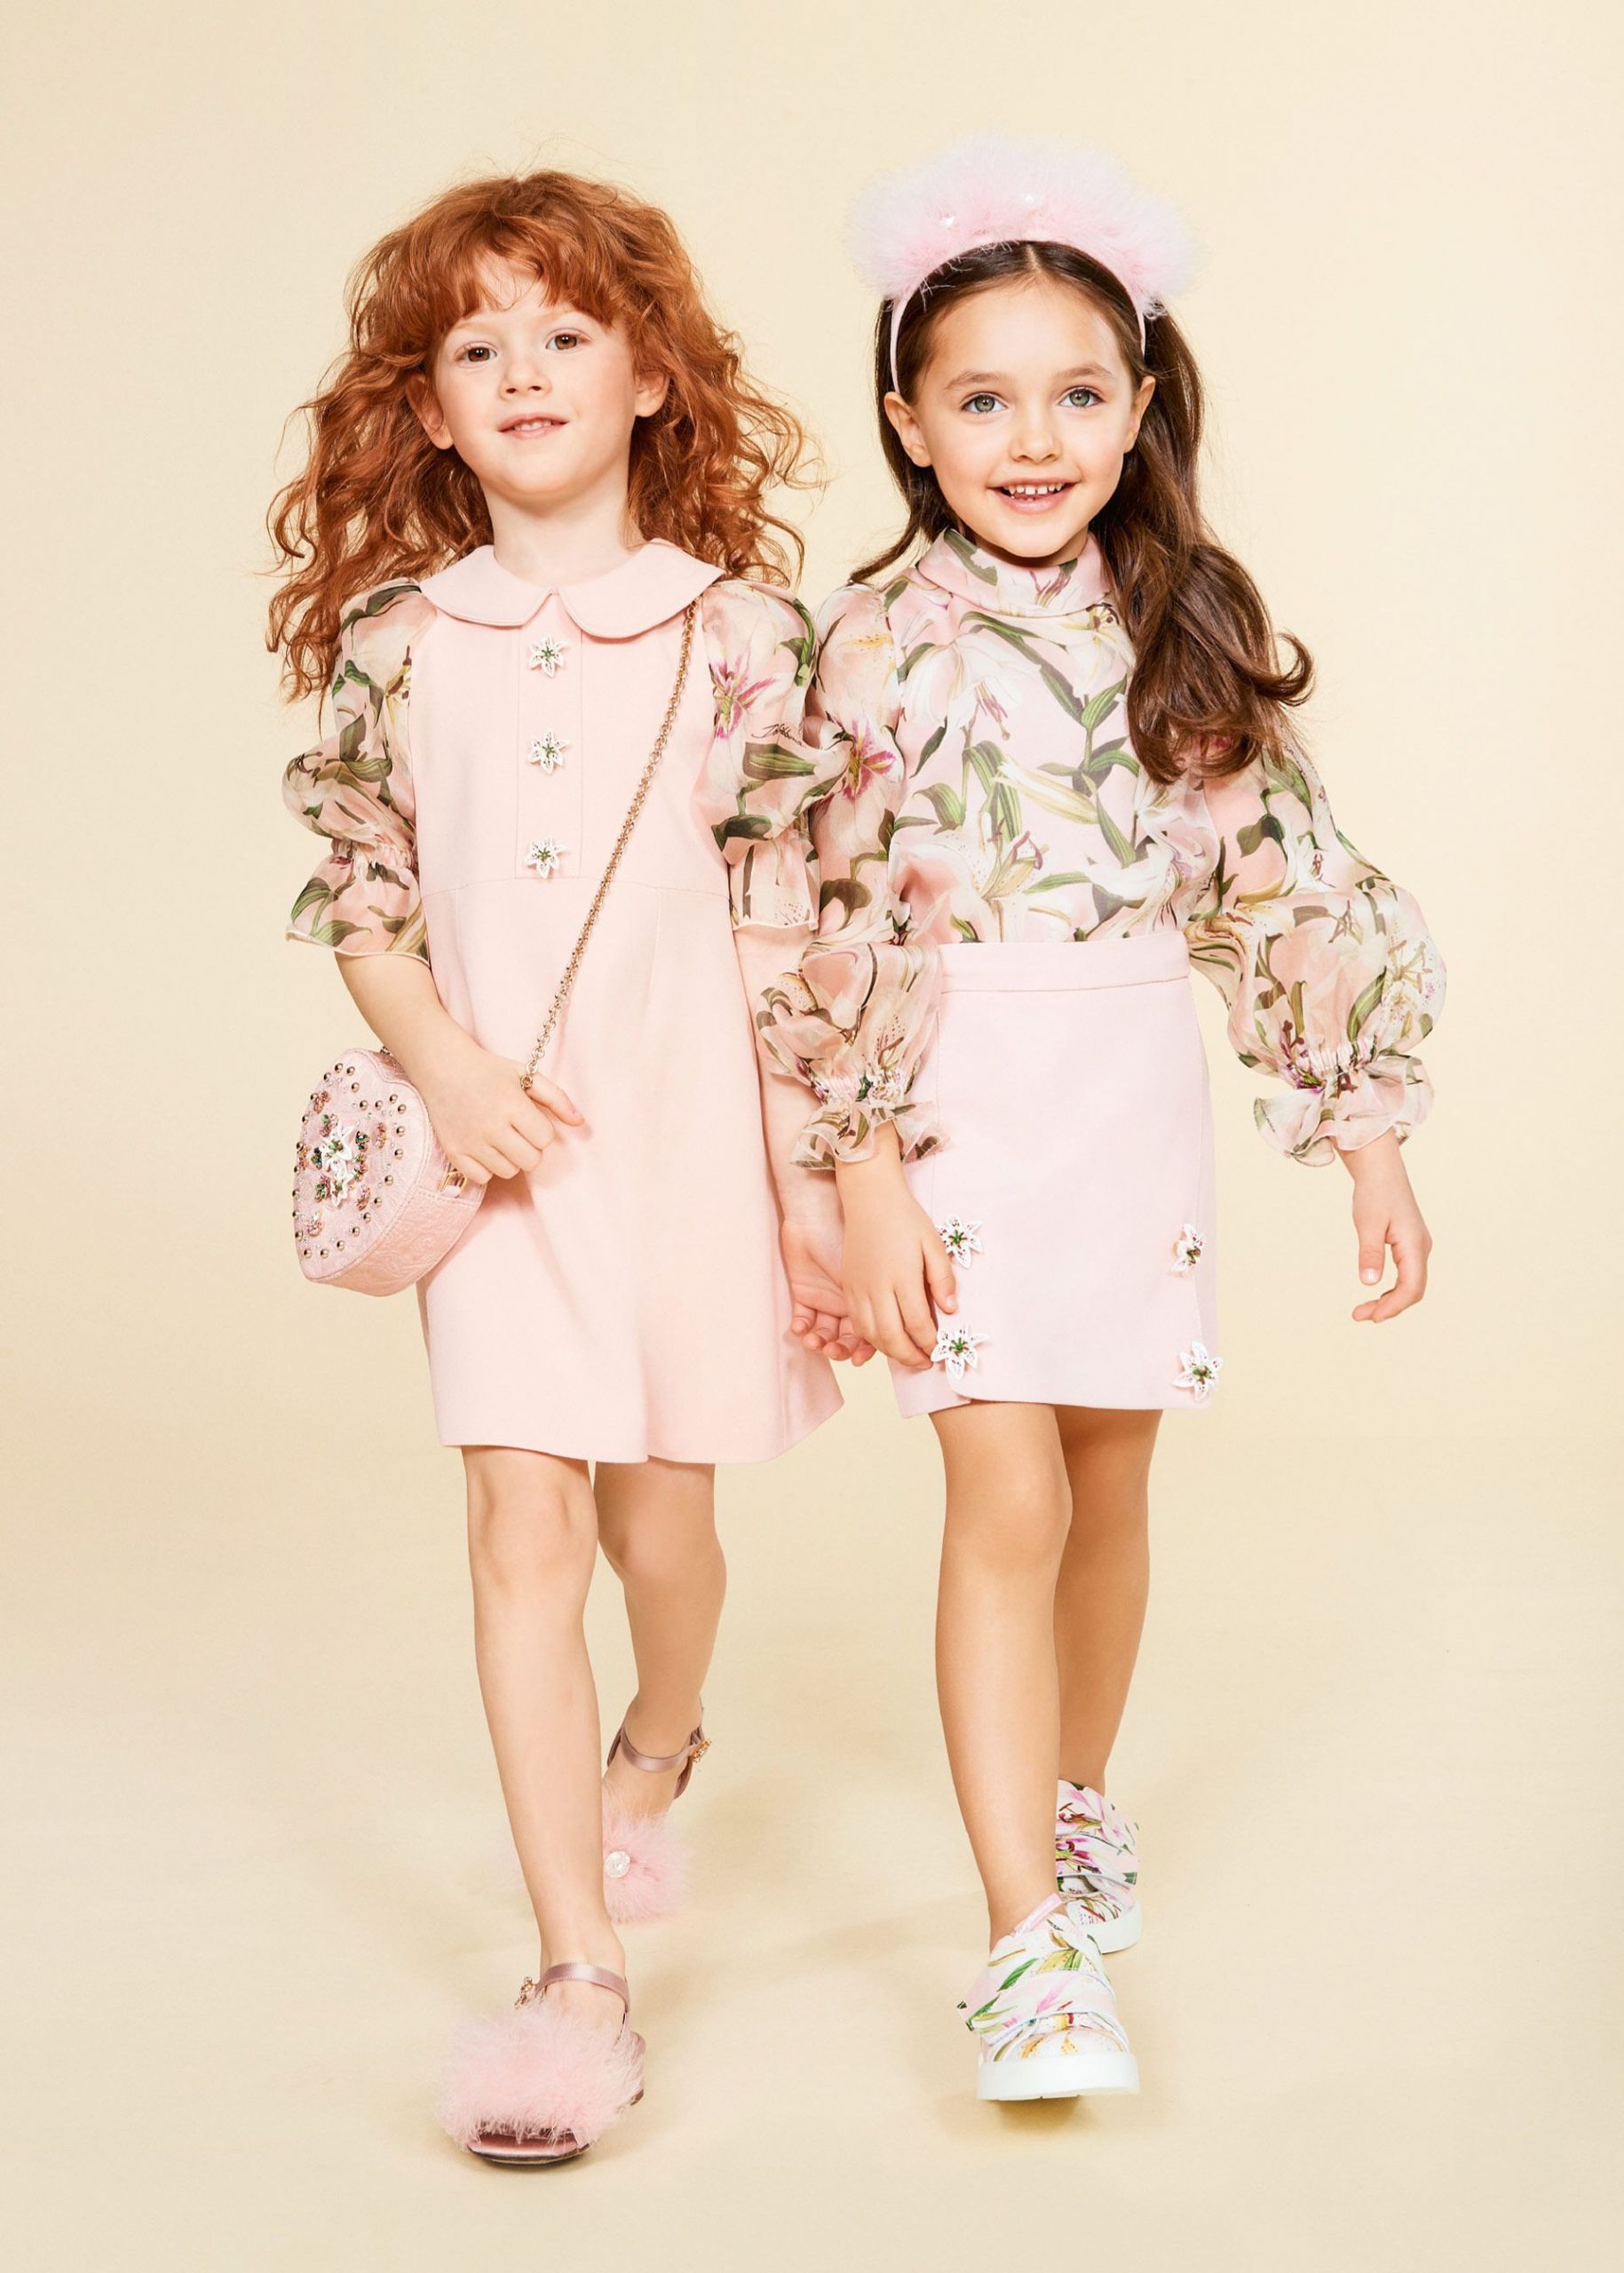 Kids Fashion Trends 2020
 15 Cutest Kids Fashion Trends for Winter 2020